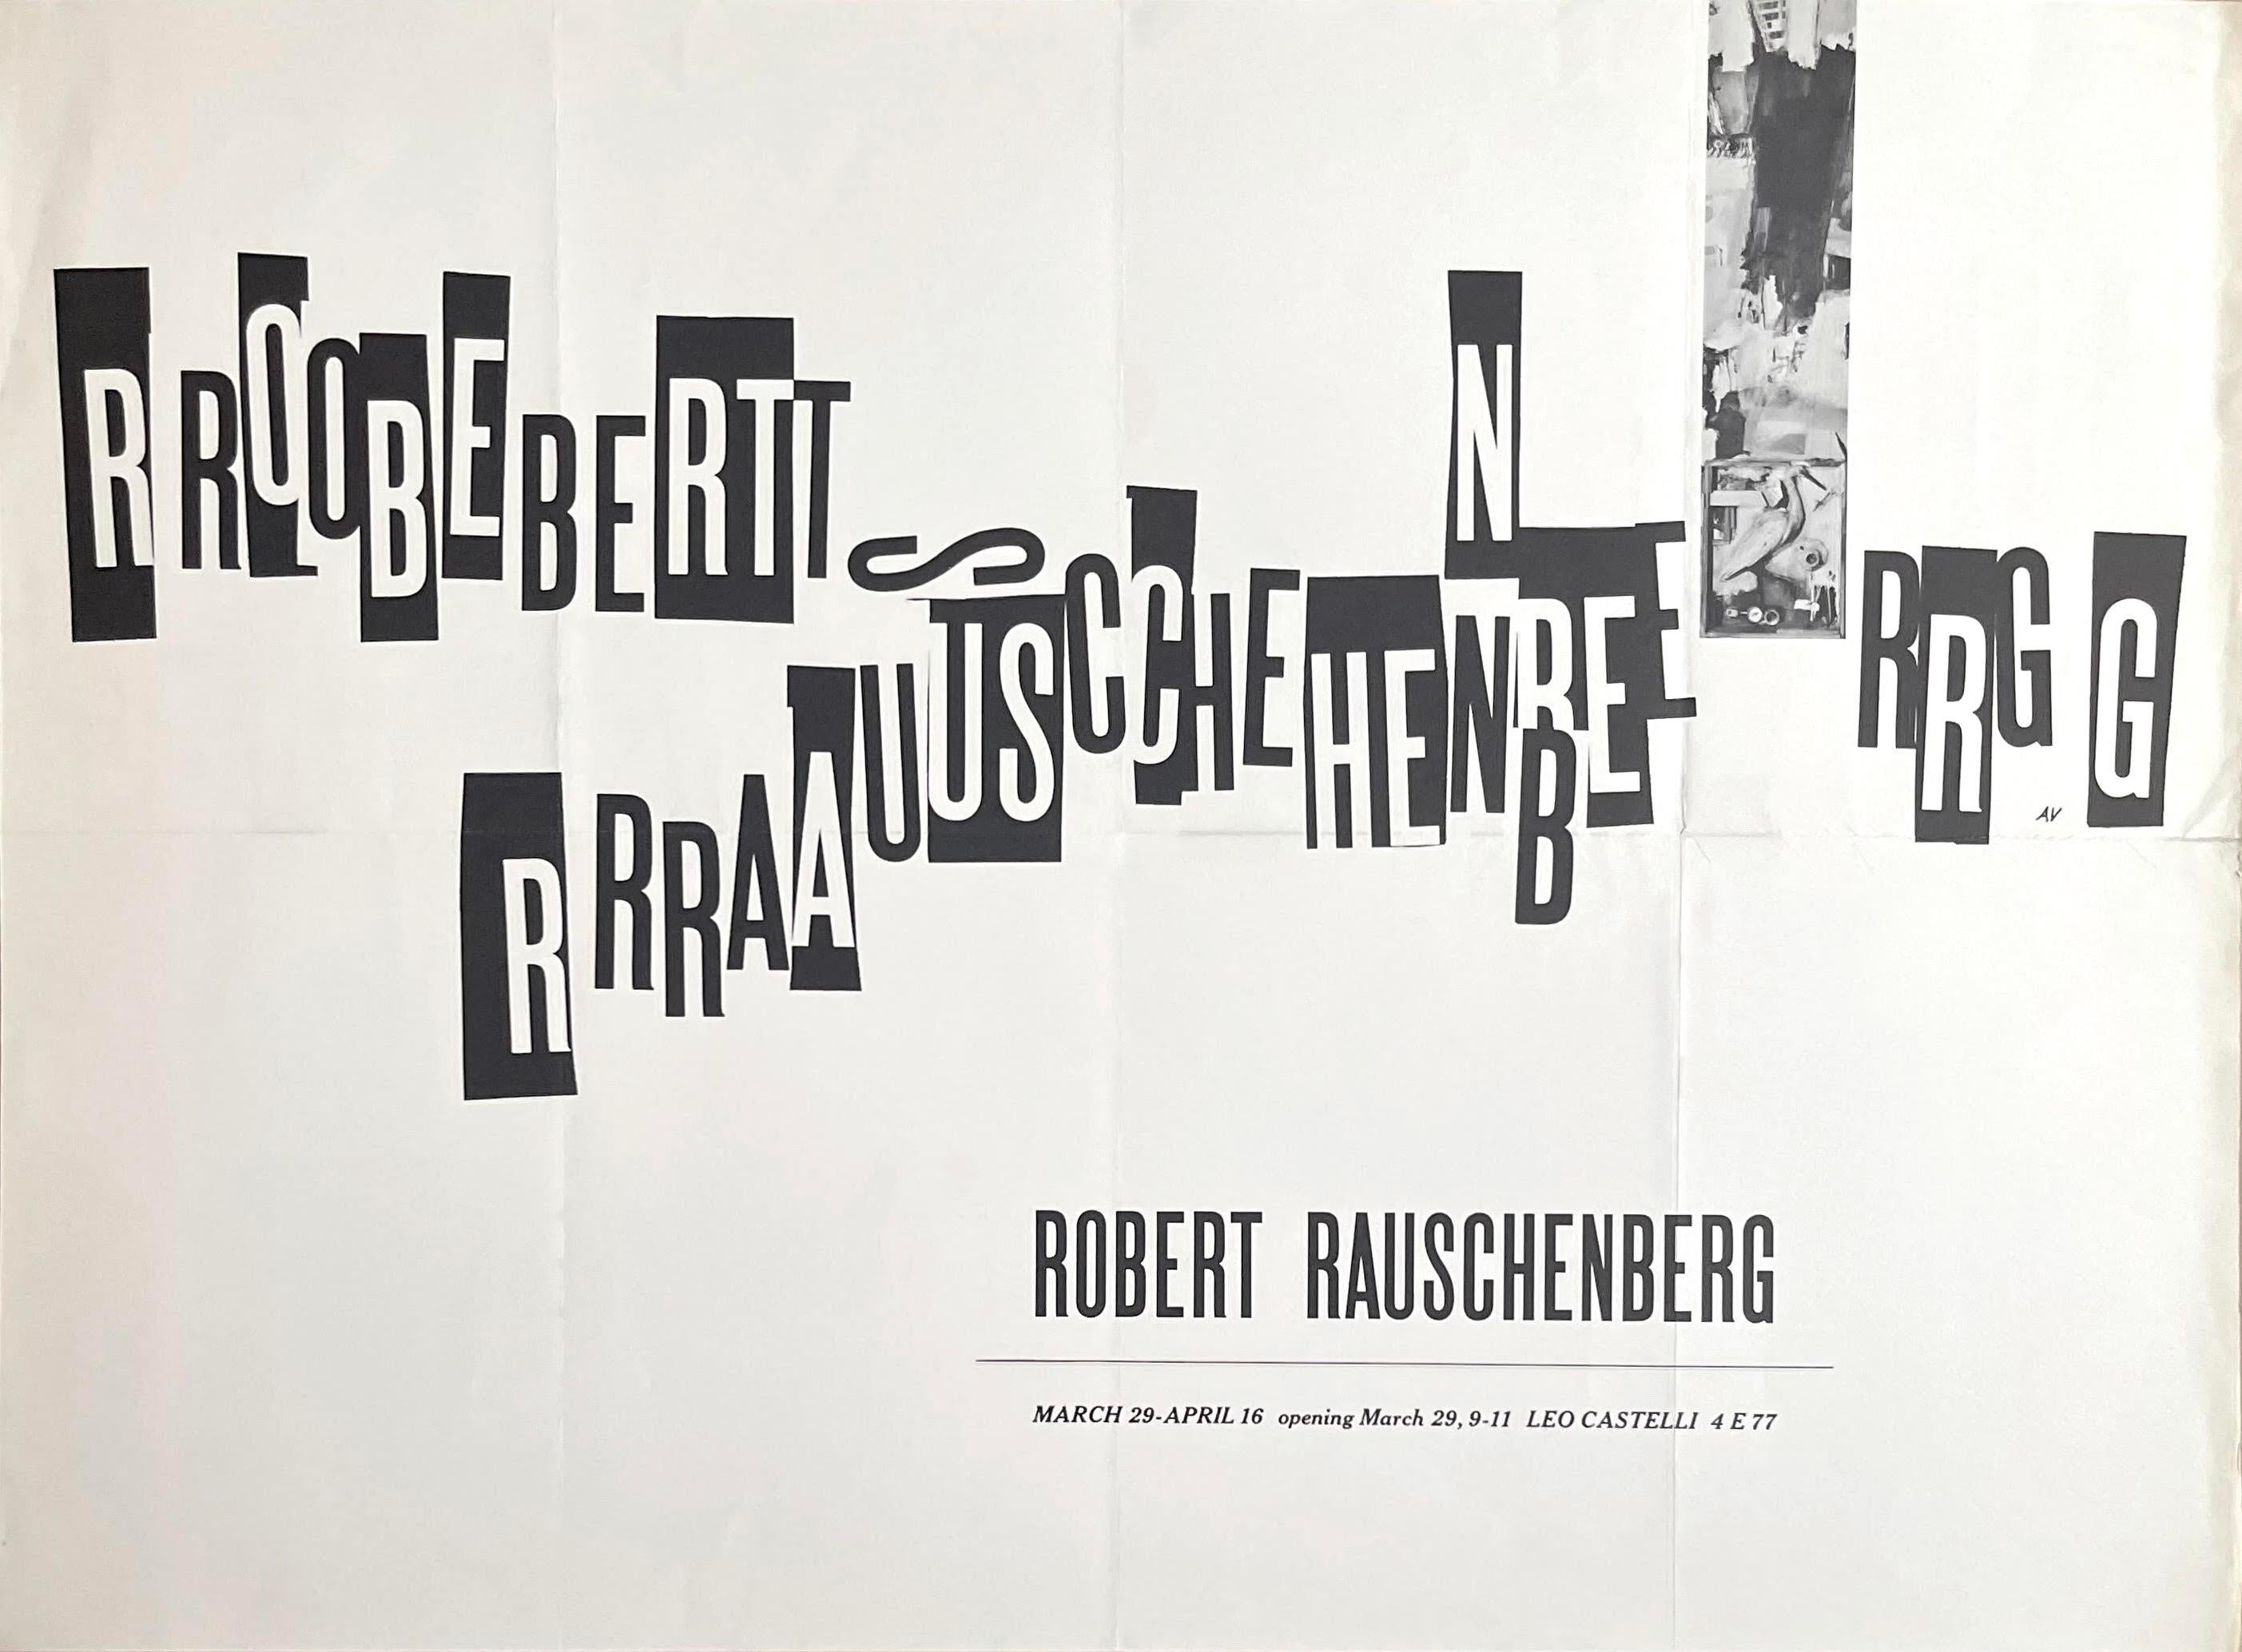 Robert Rauschenberg
Robert Rauschenberg at Leo Castelli (postmarked to artist Ludwig Sander), 1960
Offset lithograph poster
19 × 26 inches
Unframed
This rare, historic early Robert Rauschenberg poster was published on the occasion of his second show